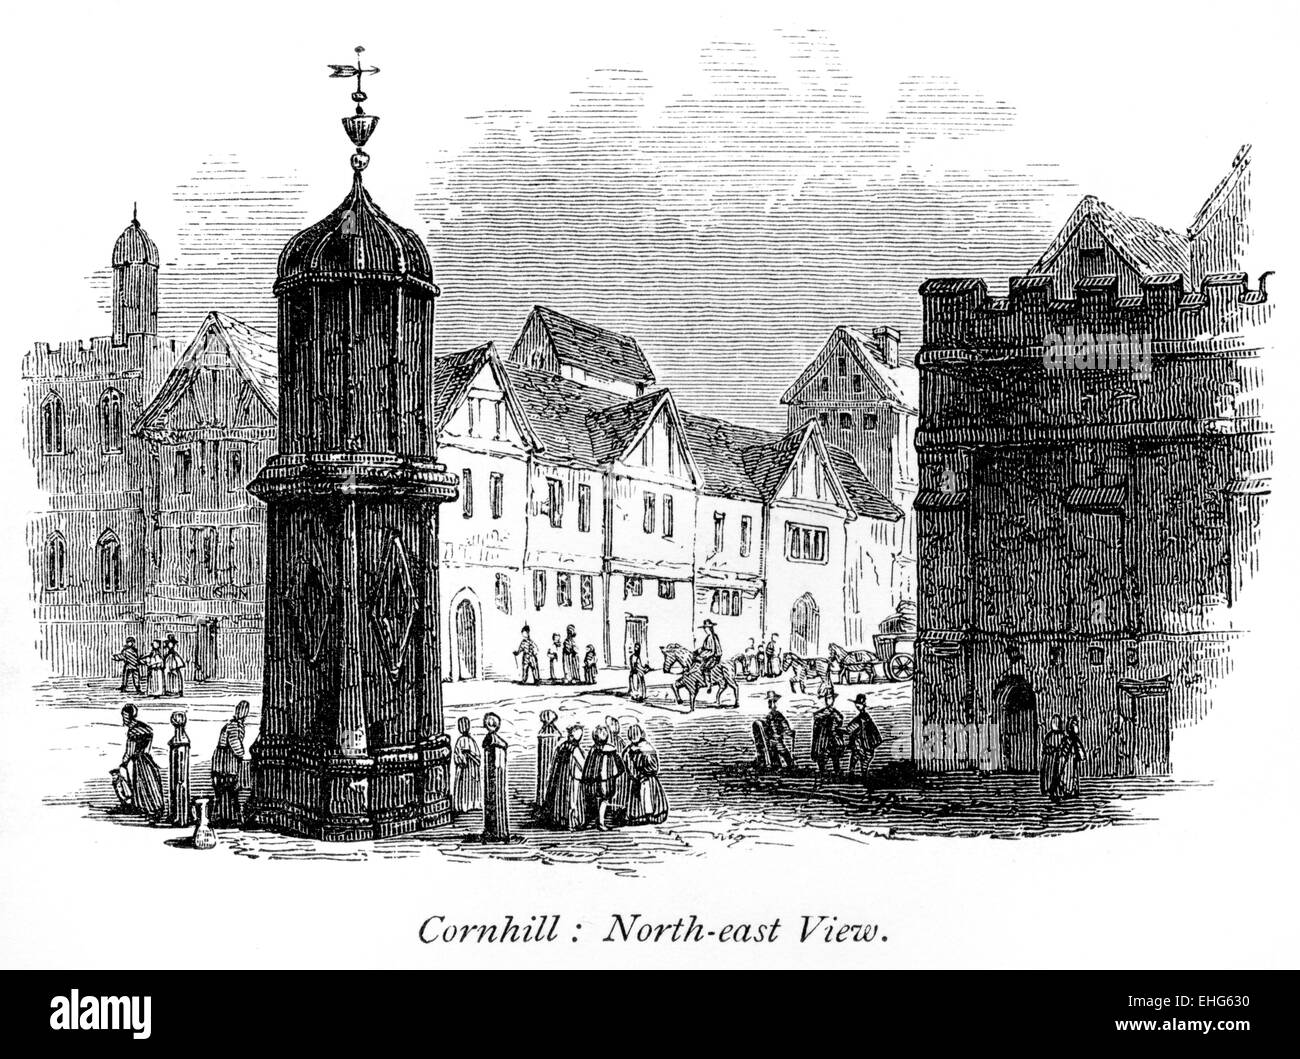 An engraving of a North-east View of Cornhill, London scanned at high resolution from a book printed in 1867. Stock Photo